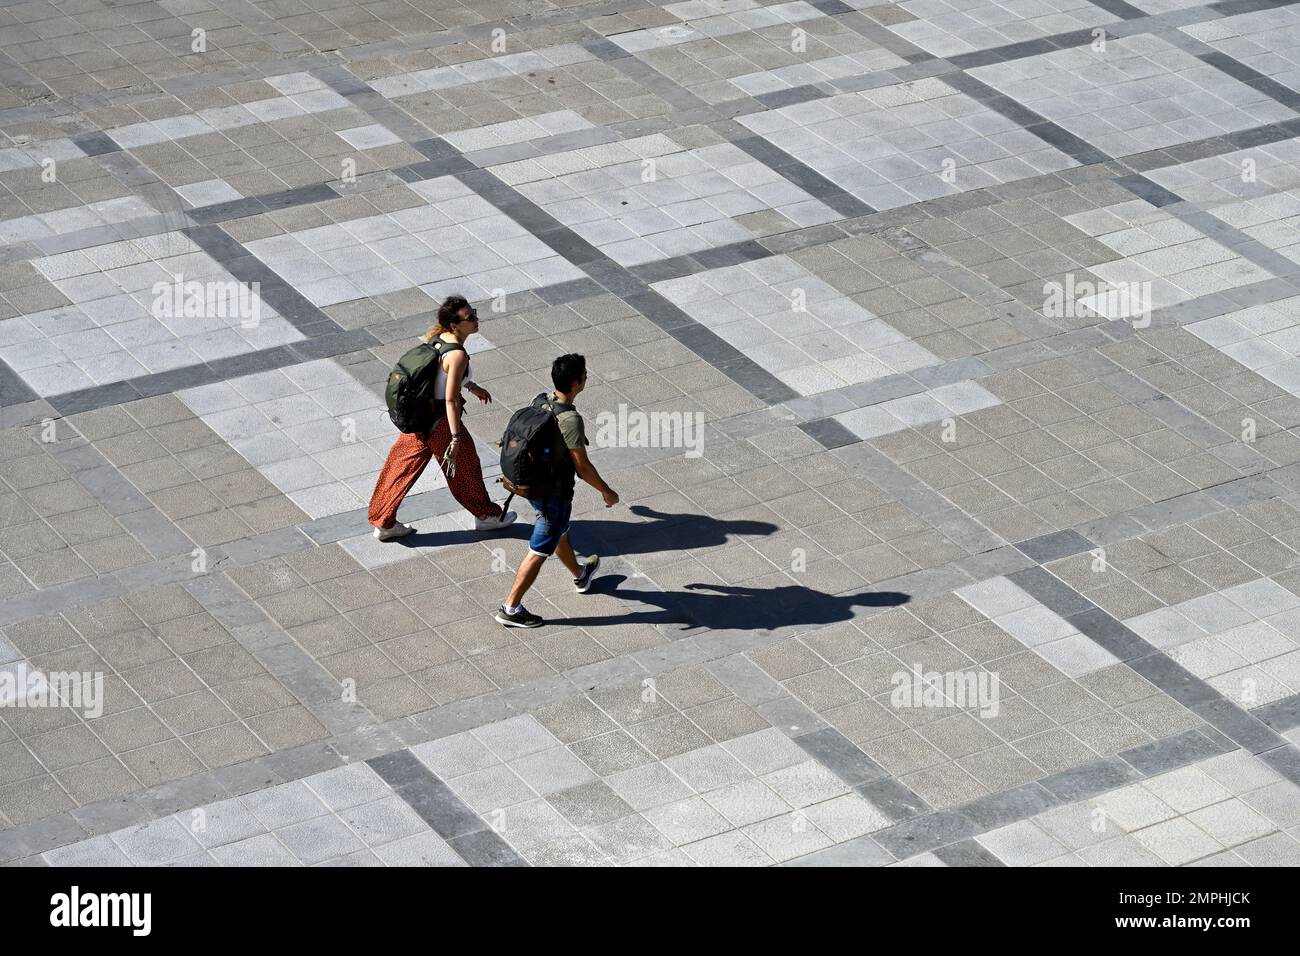 View from above two people walking in public square with shadows Stock Photo